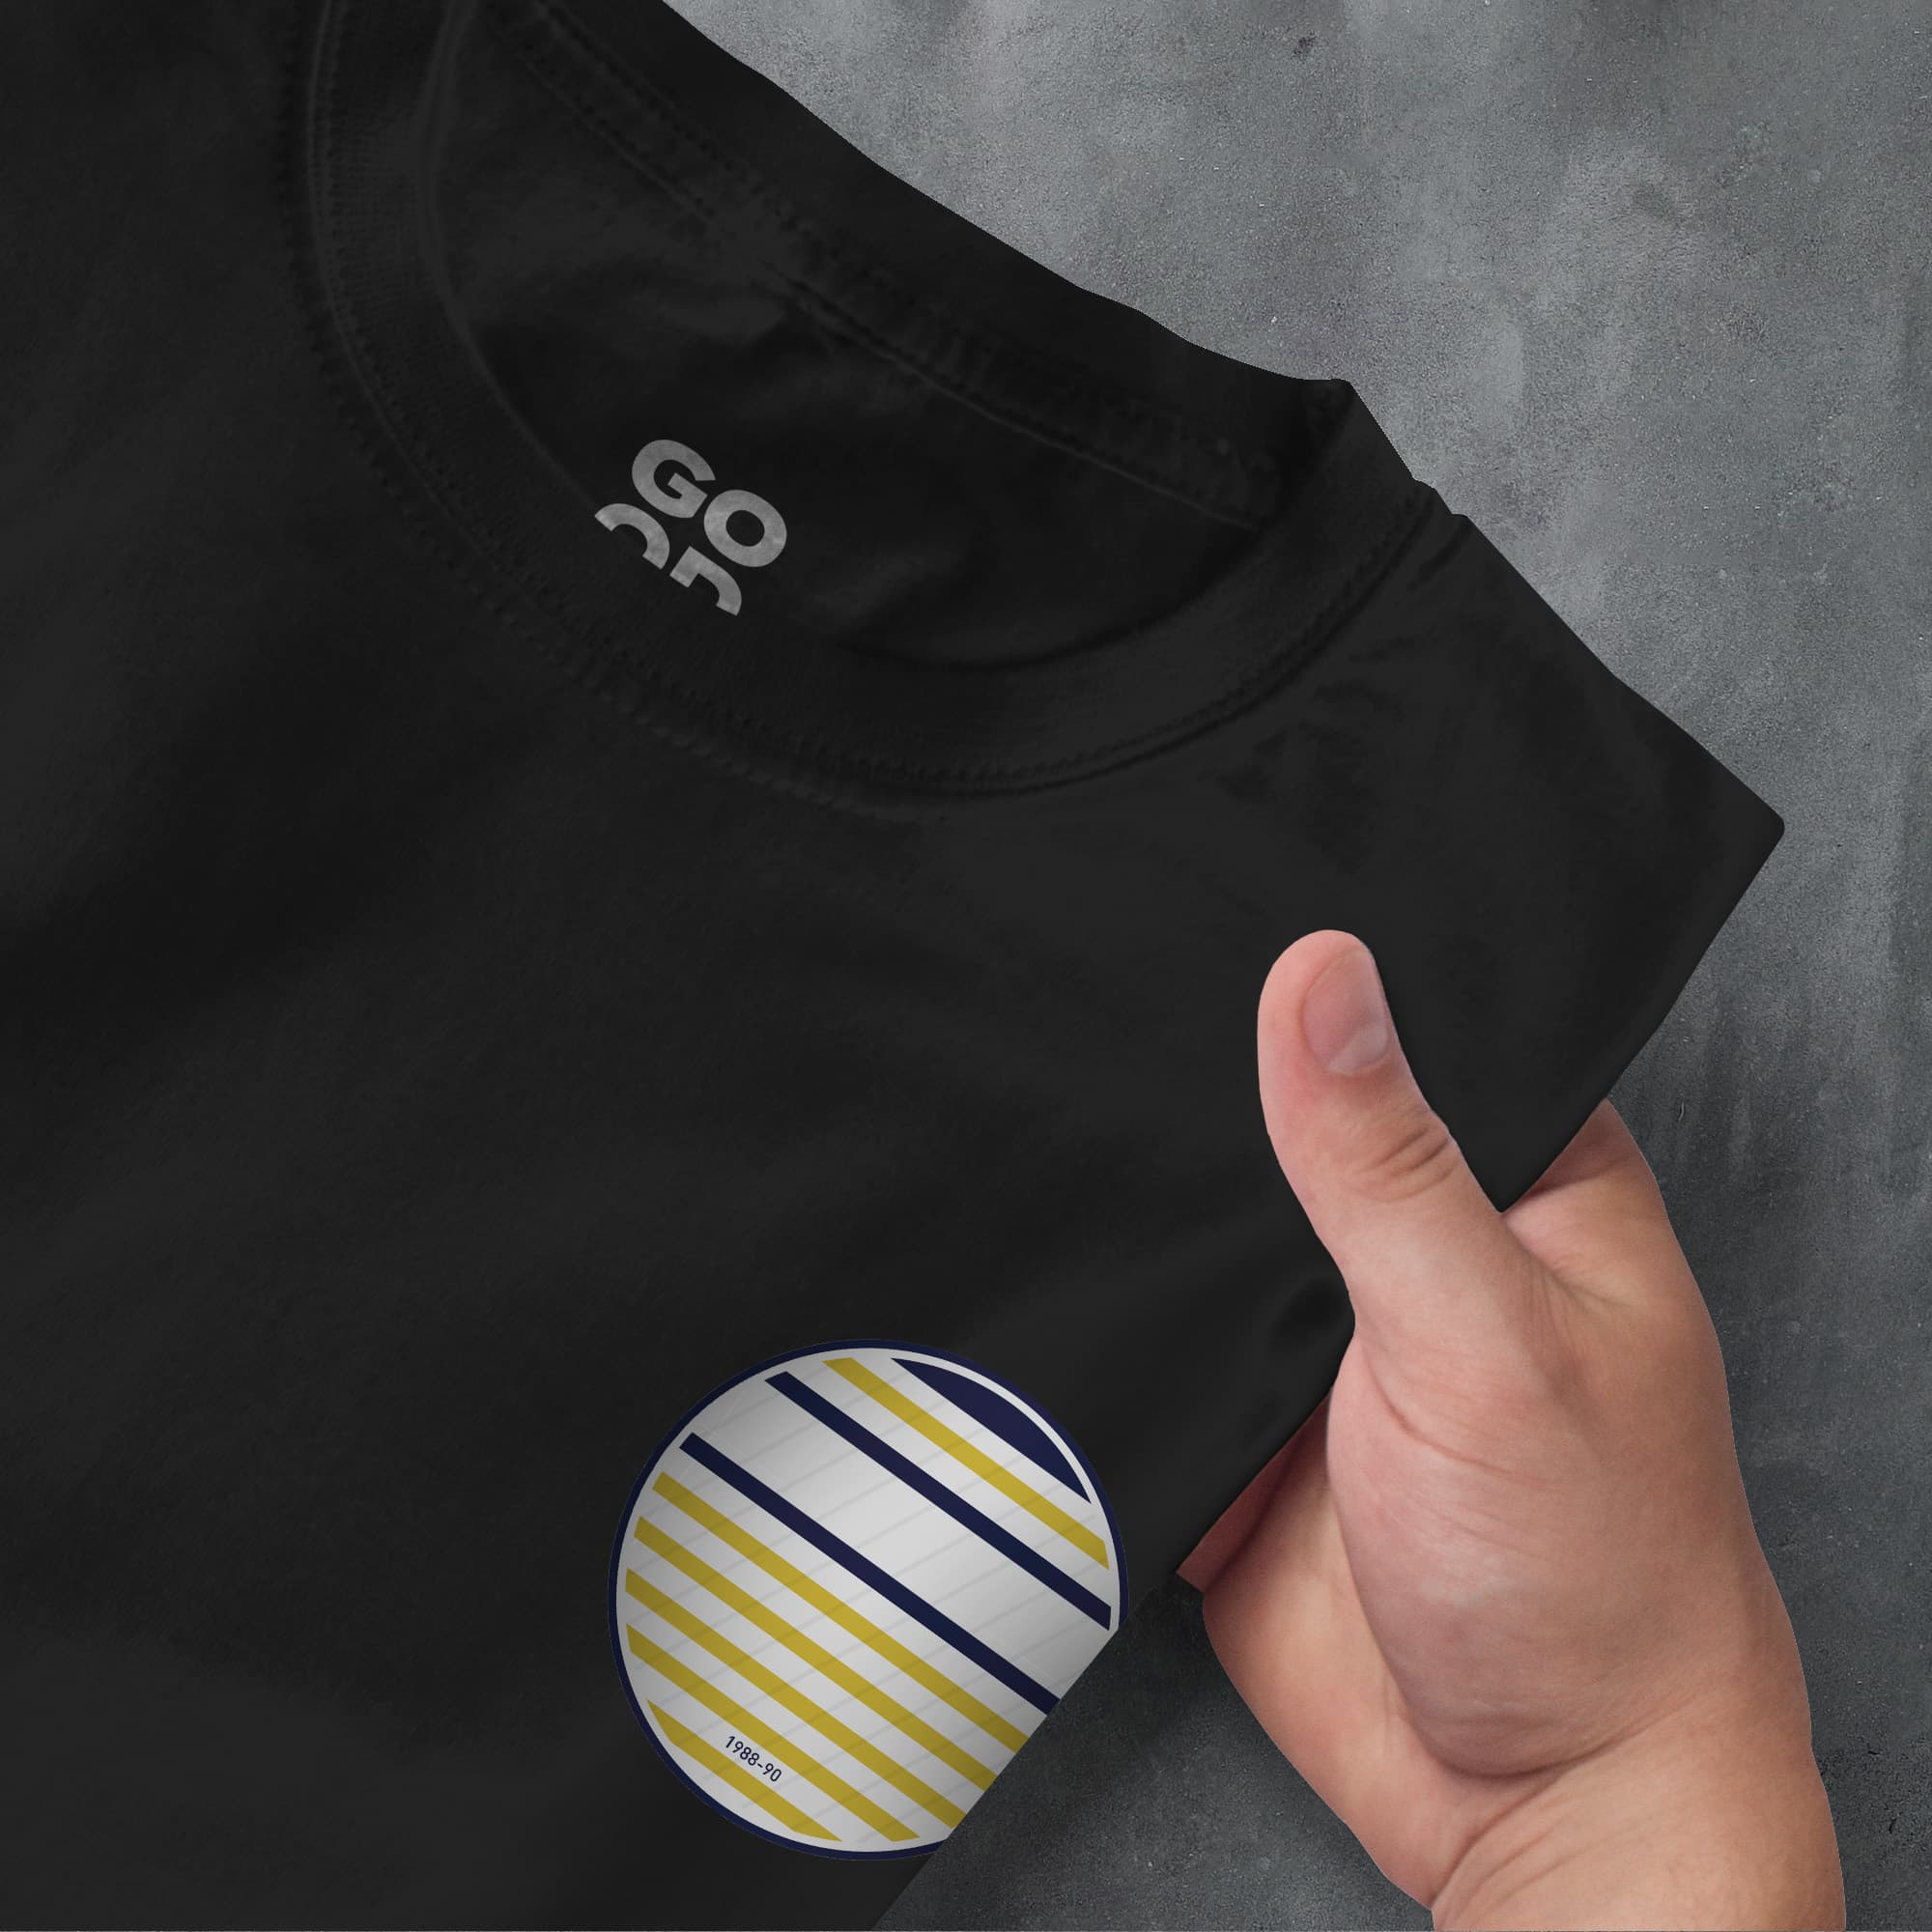 a person pointing at a black shirt with yellow and blue stripes